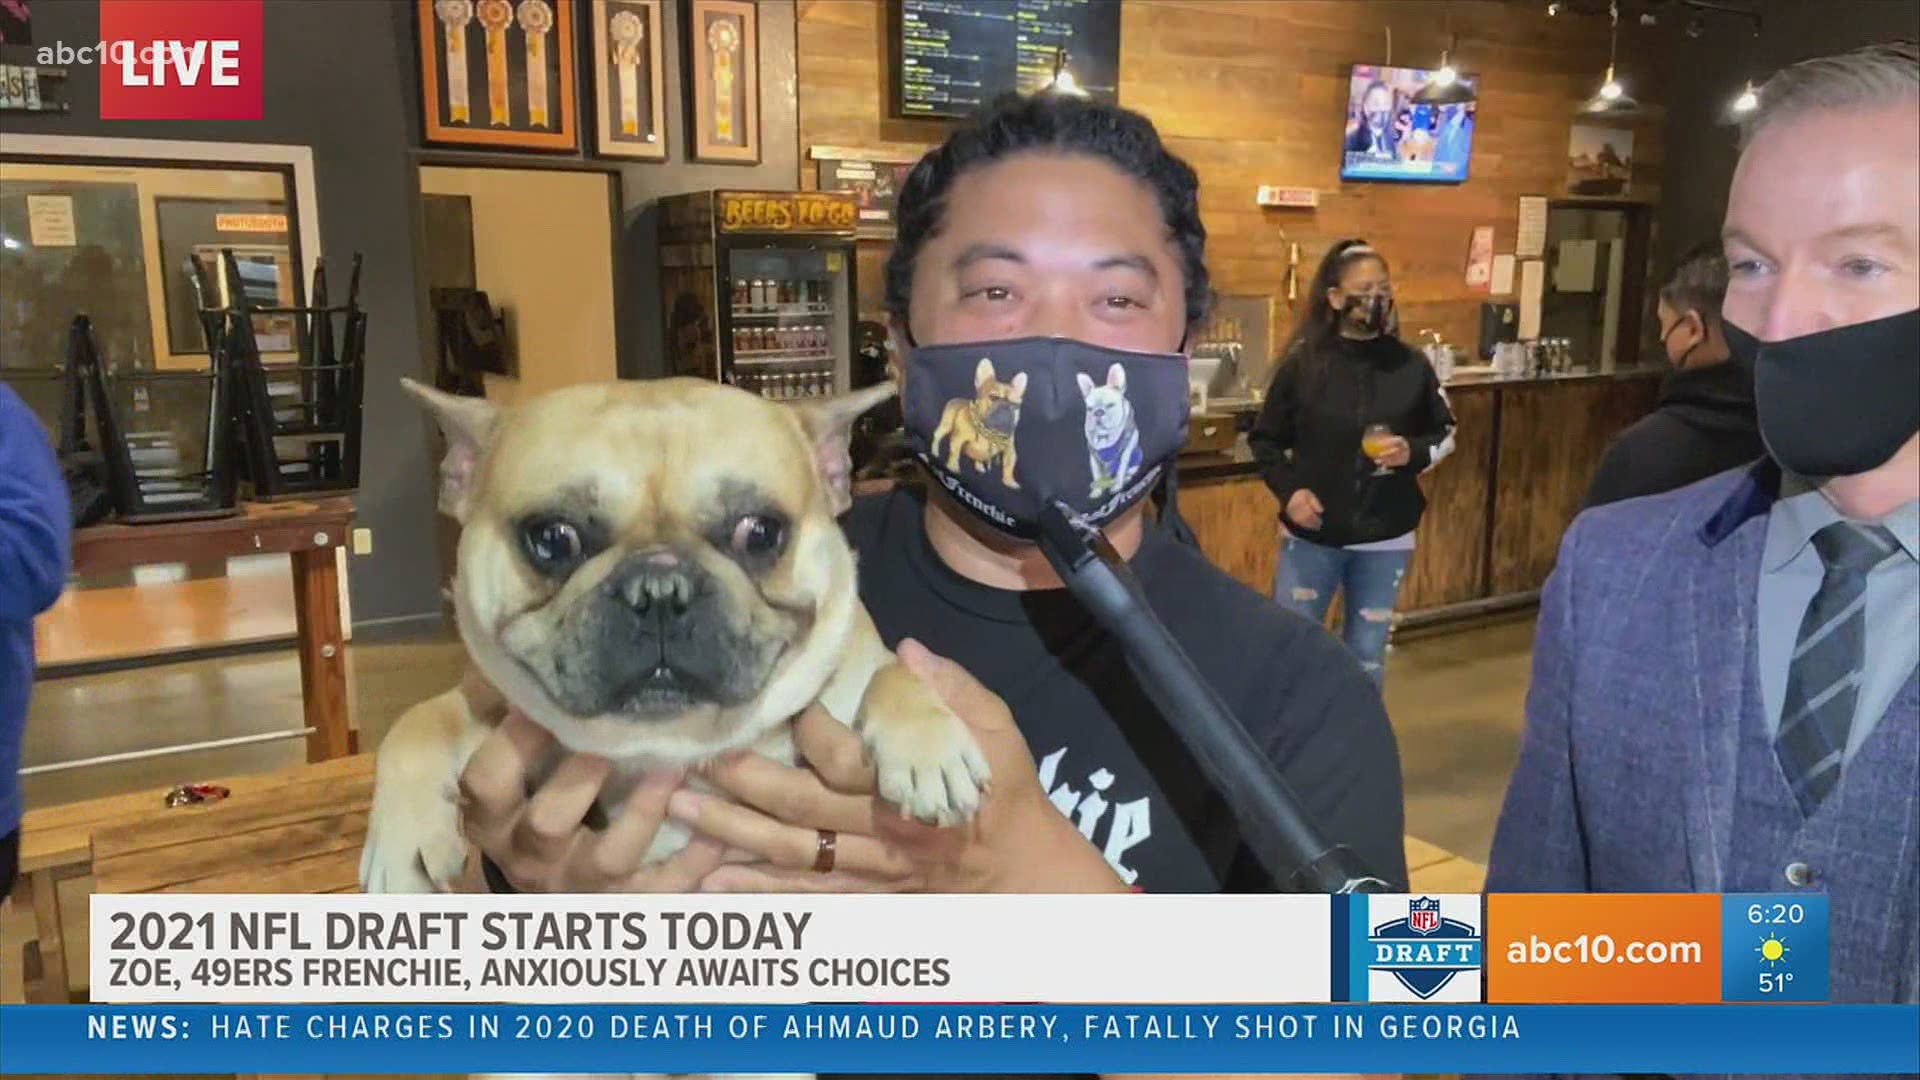 Check out this French Bulldog fashion show to calm your pre-NFL draft nerves.